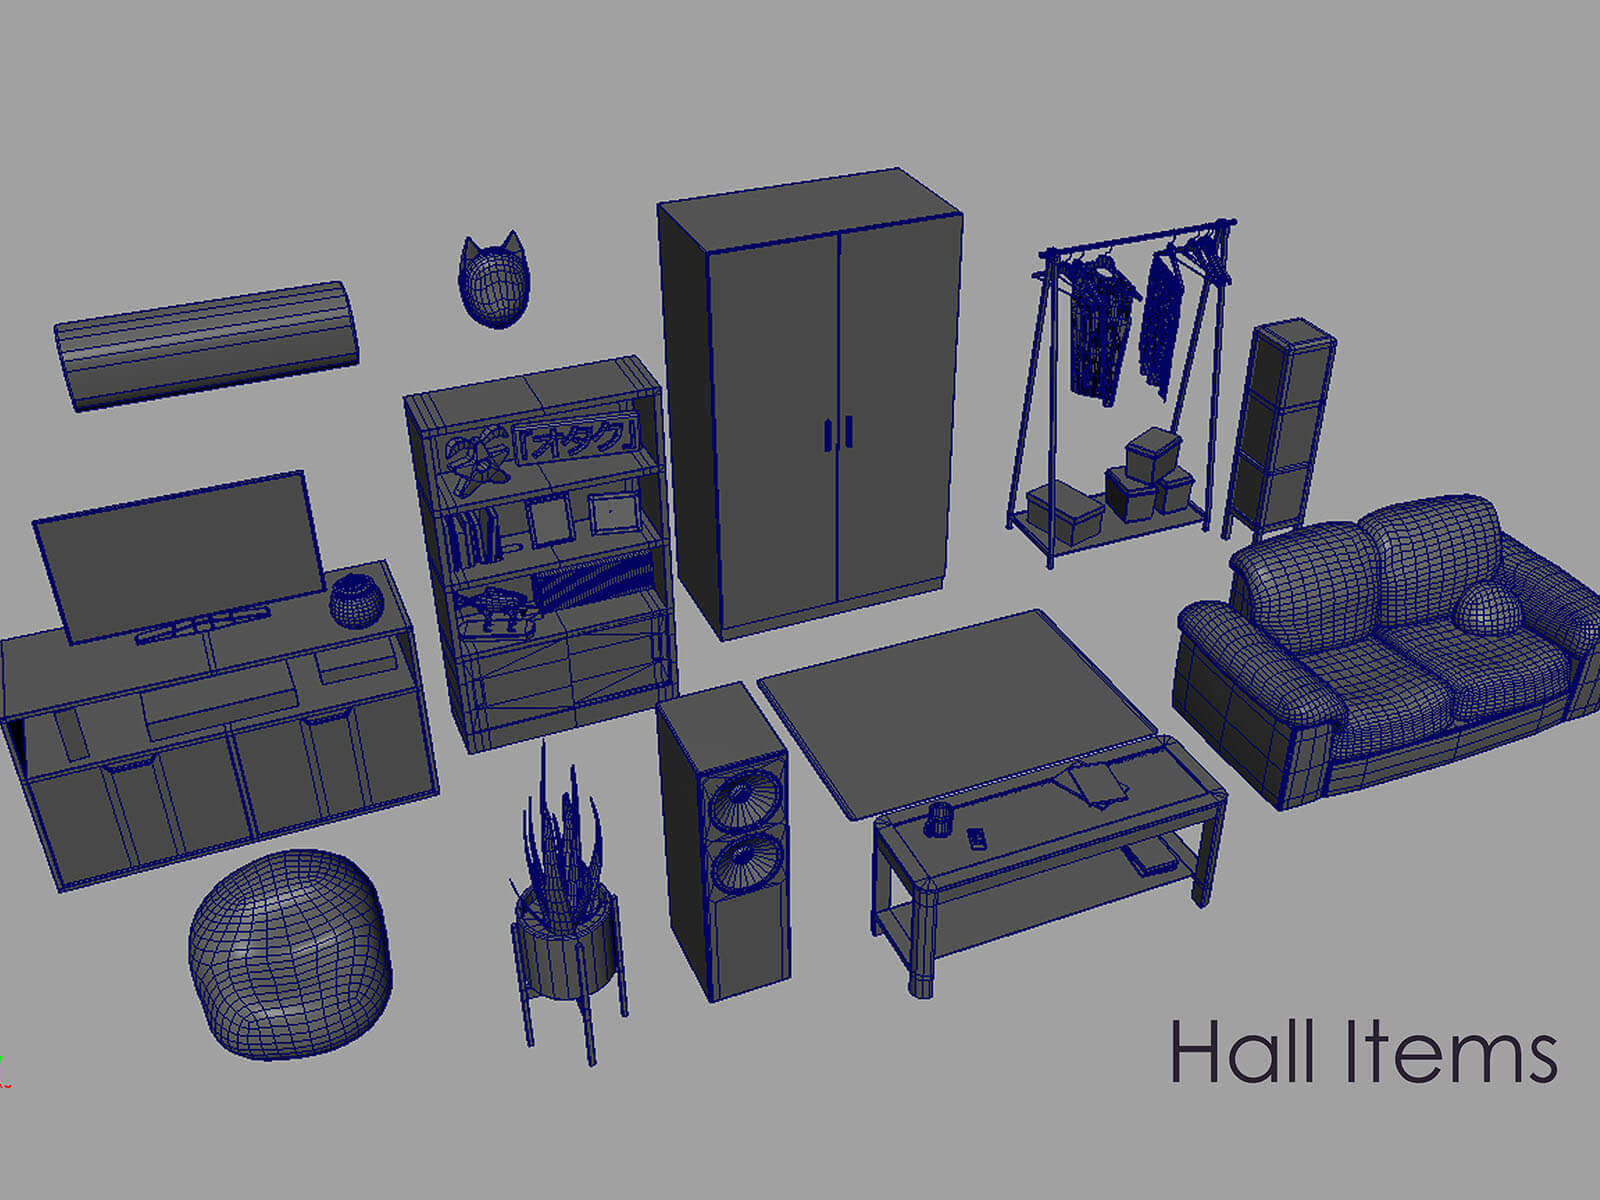 Collection of untextured 3D objects used in the scene's hallway.